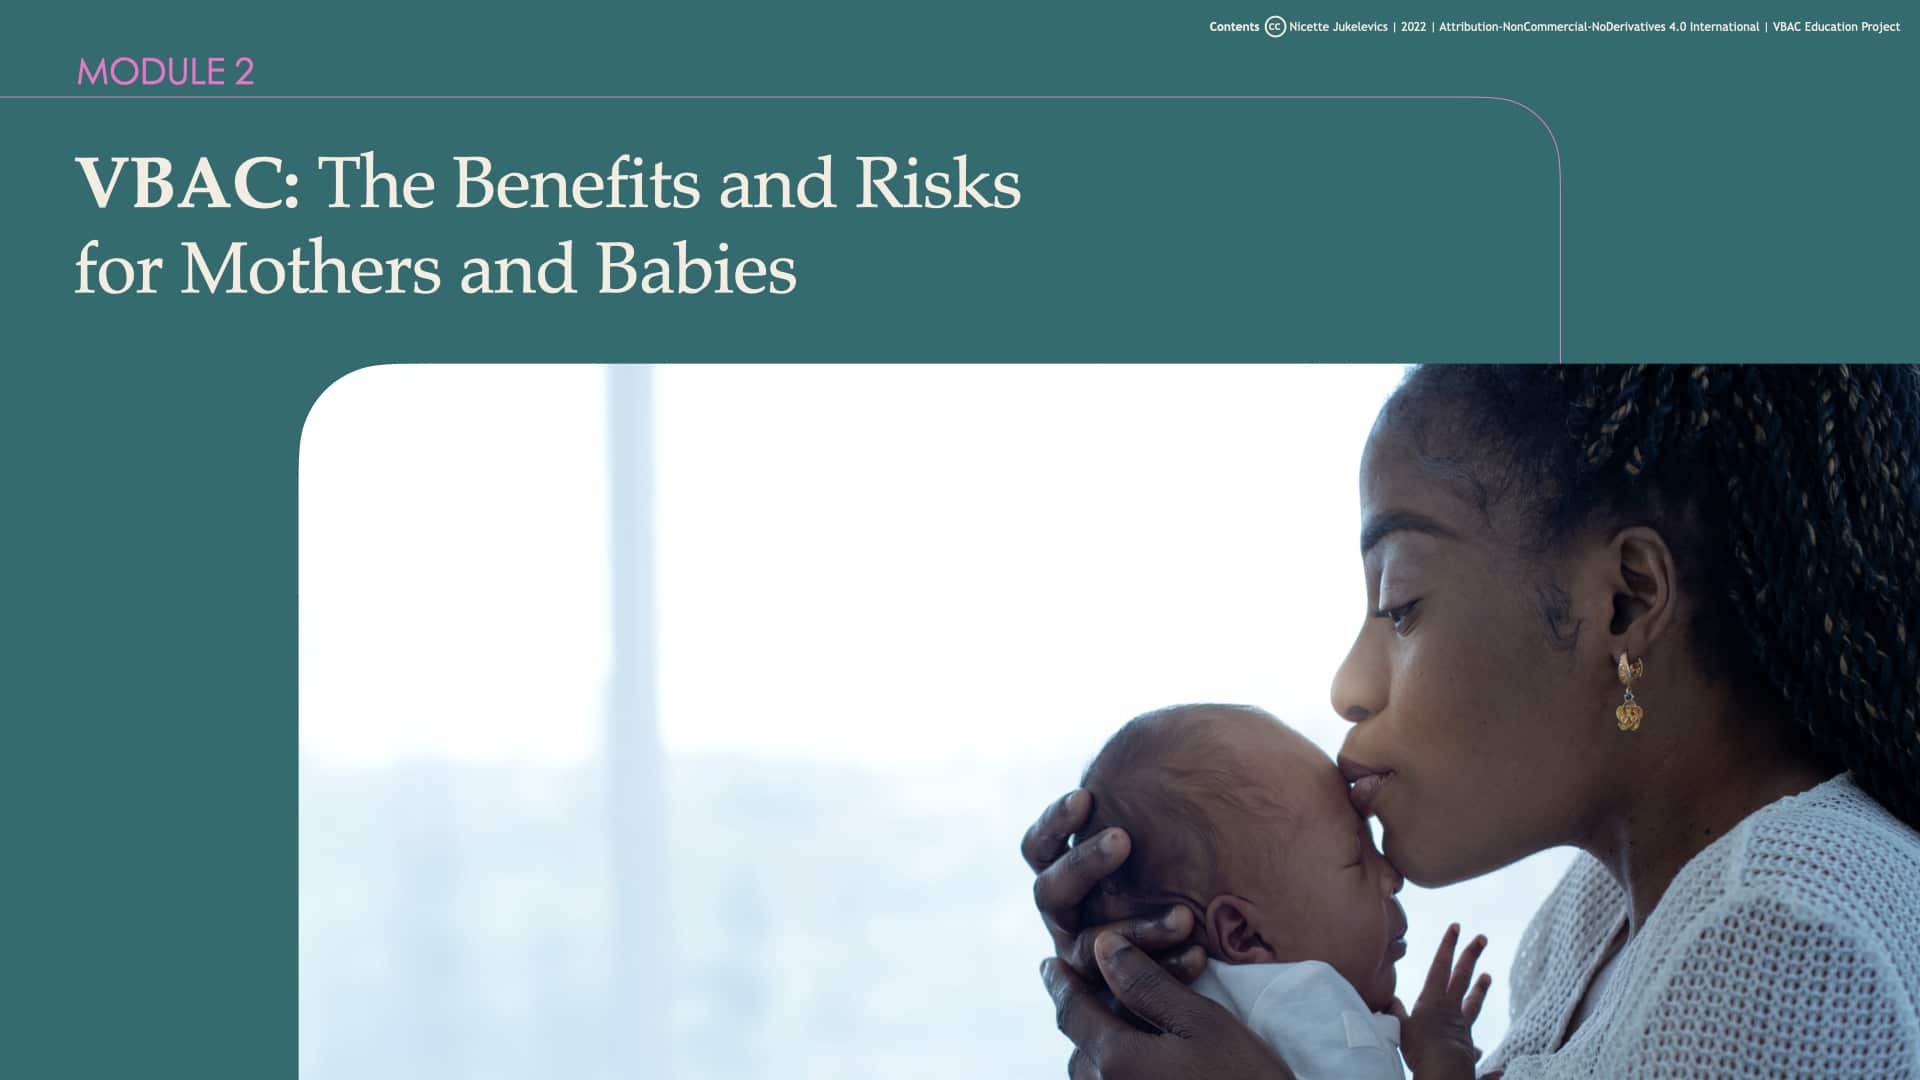 Module 2: VBAC: The Benefits and Risks for Mothers and Babies